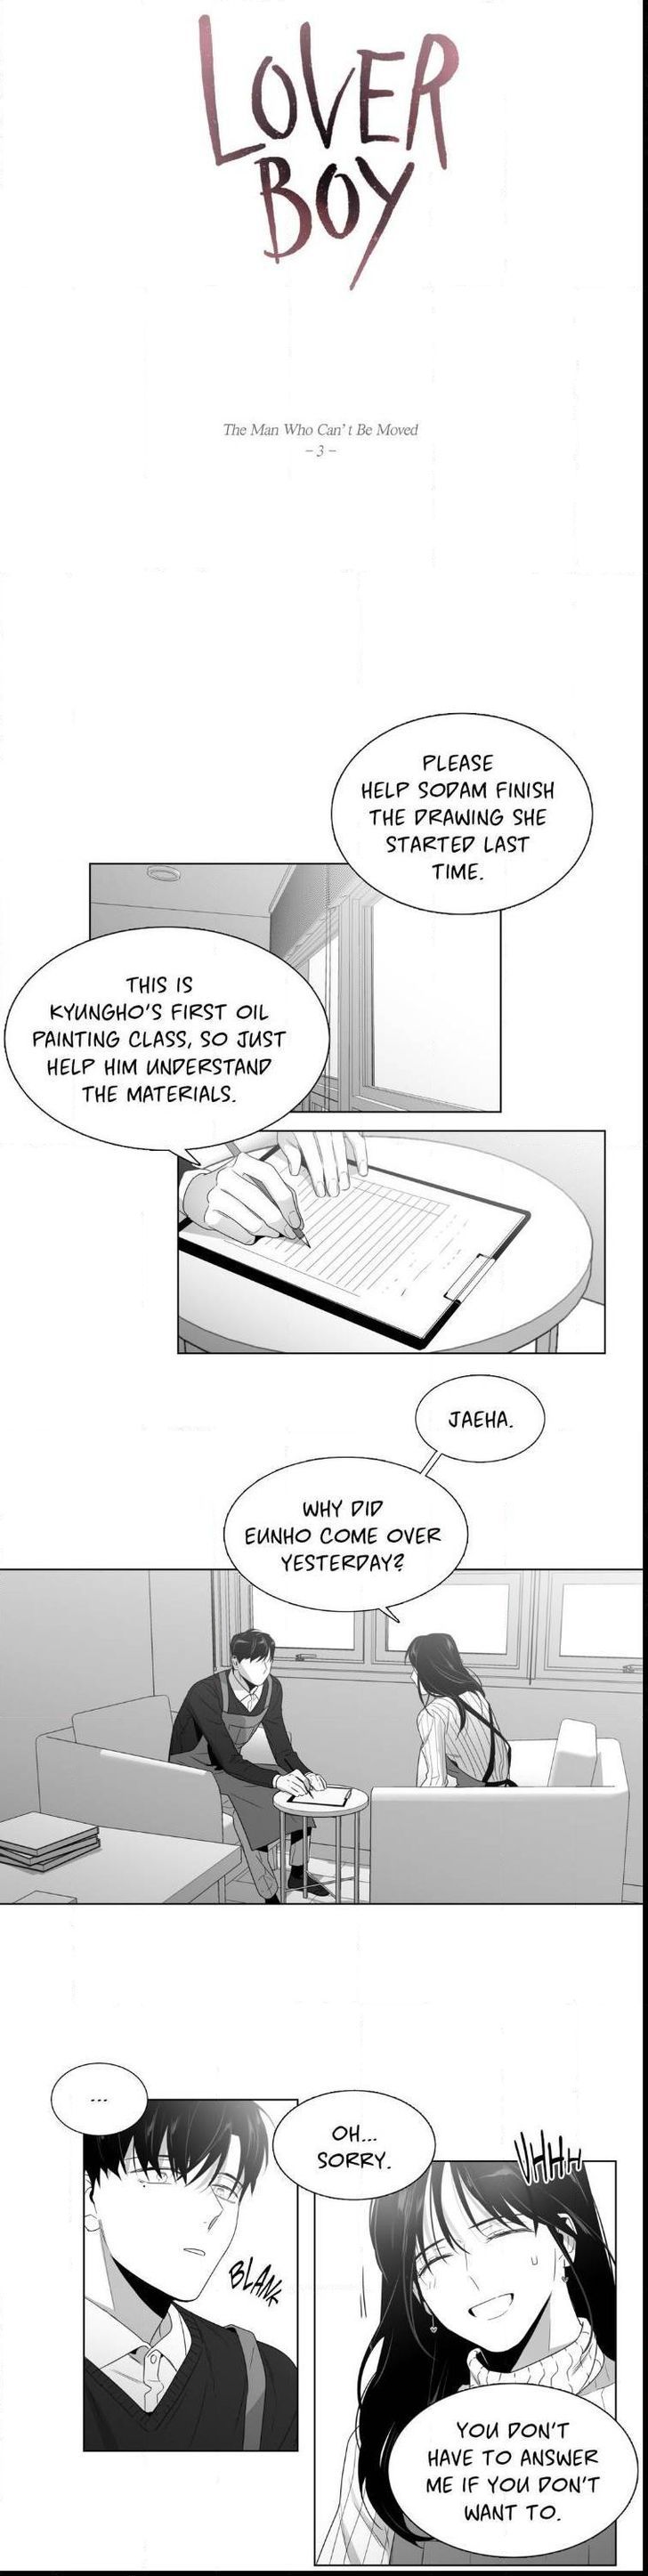 Lover Boy (Lezhin) Chapter 051 page 8